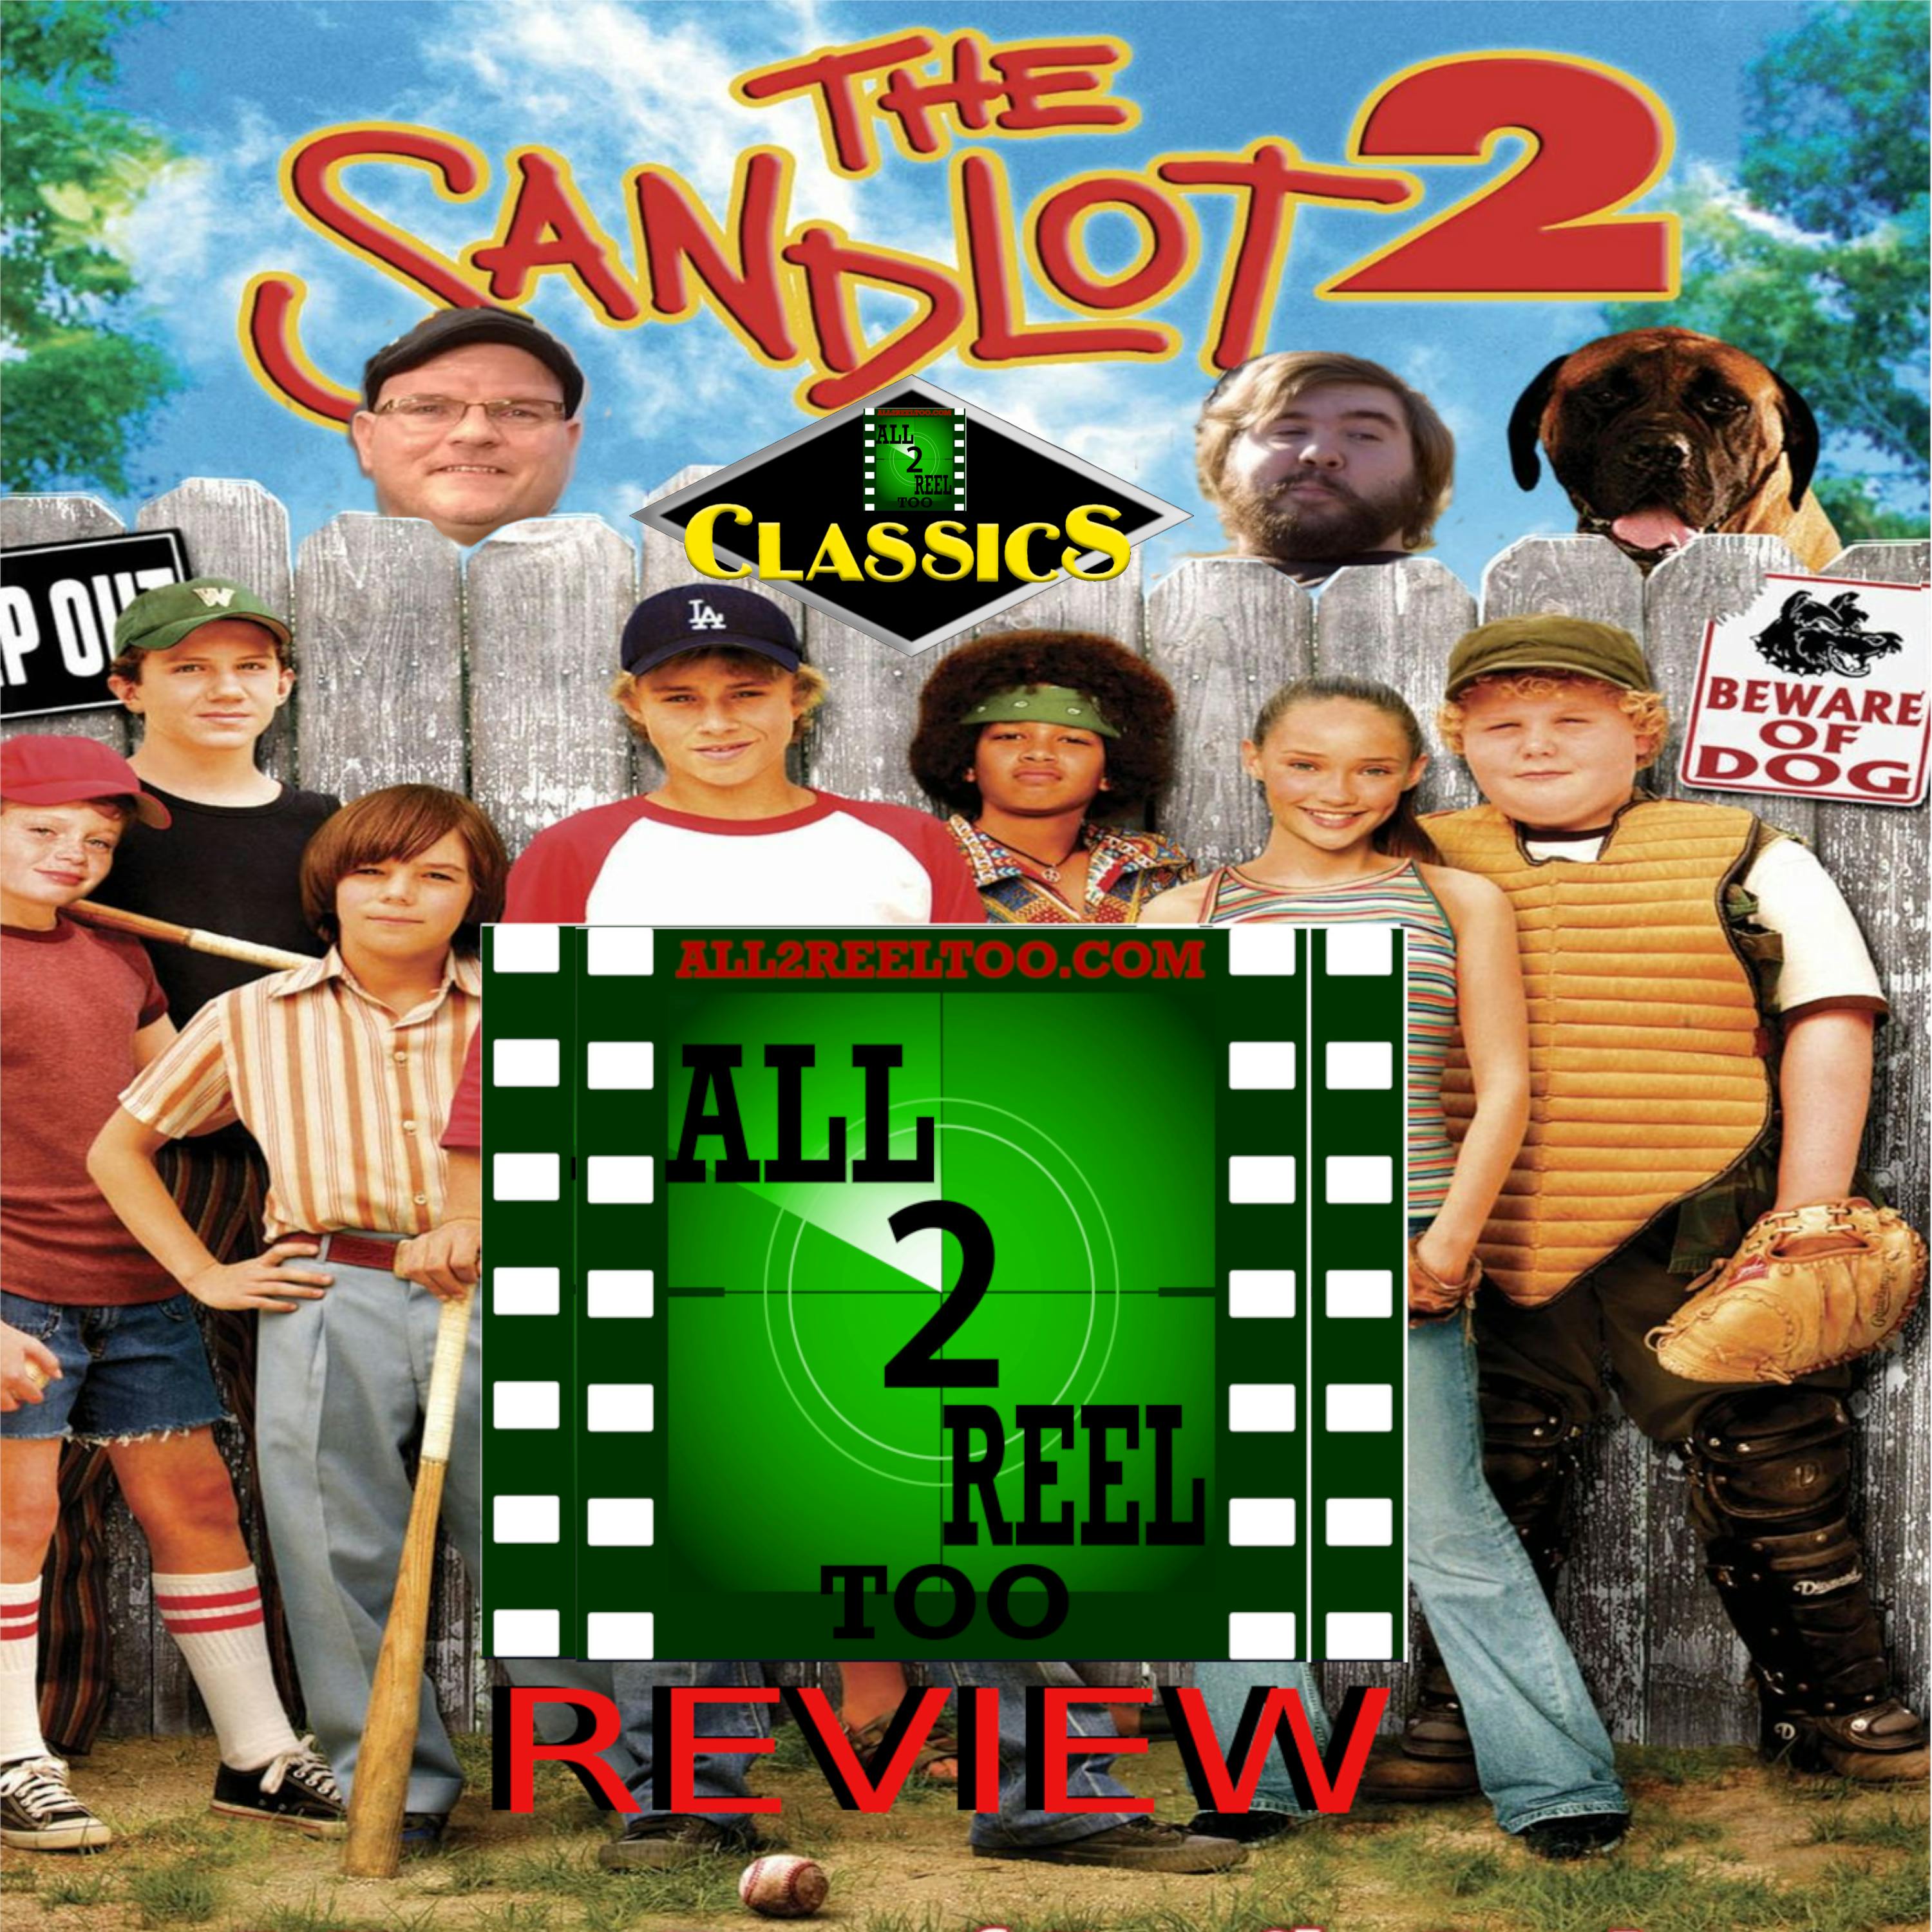 BASEBALL CLASSIC - The Sandlot 2 (2005) - Direct from Hell